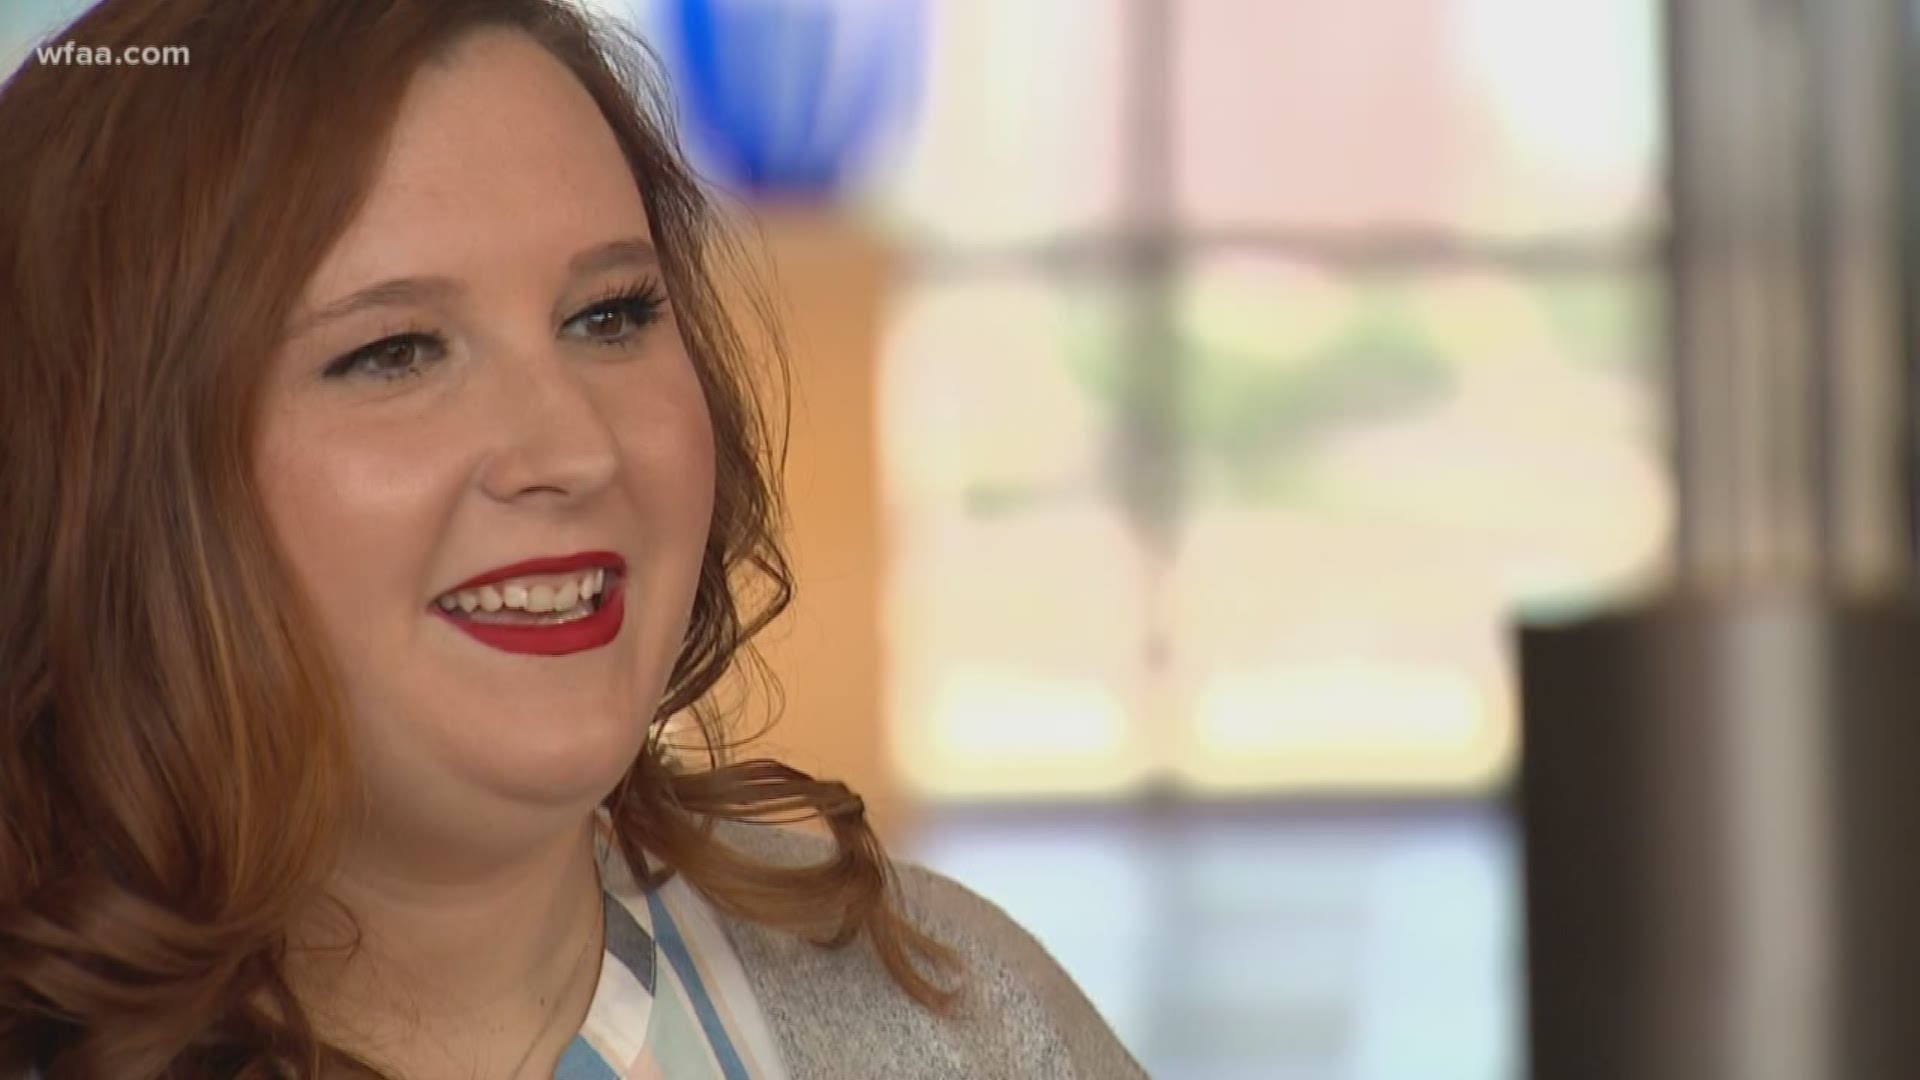 One woman has found hope in Dallas. Born without a uterus, she's moved to North Texas for a uterus transplant.